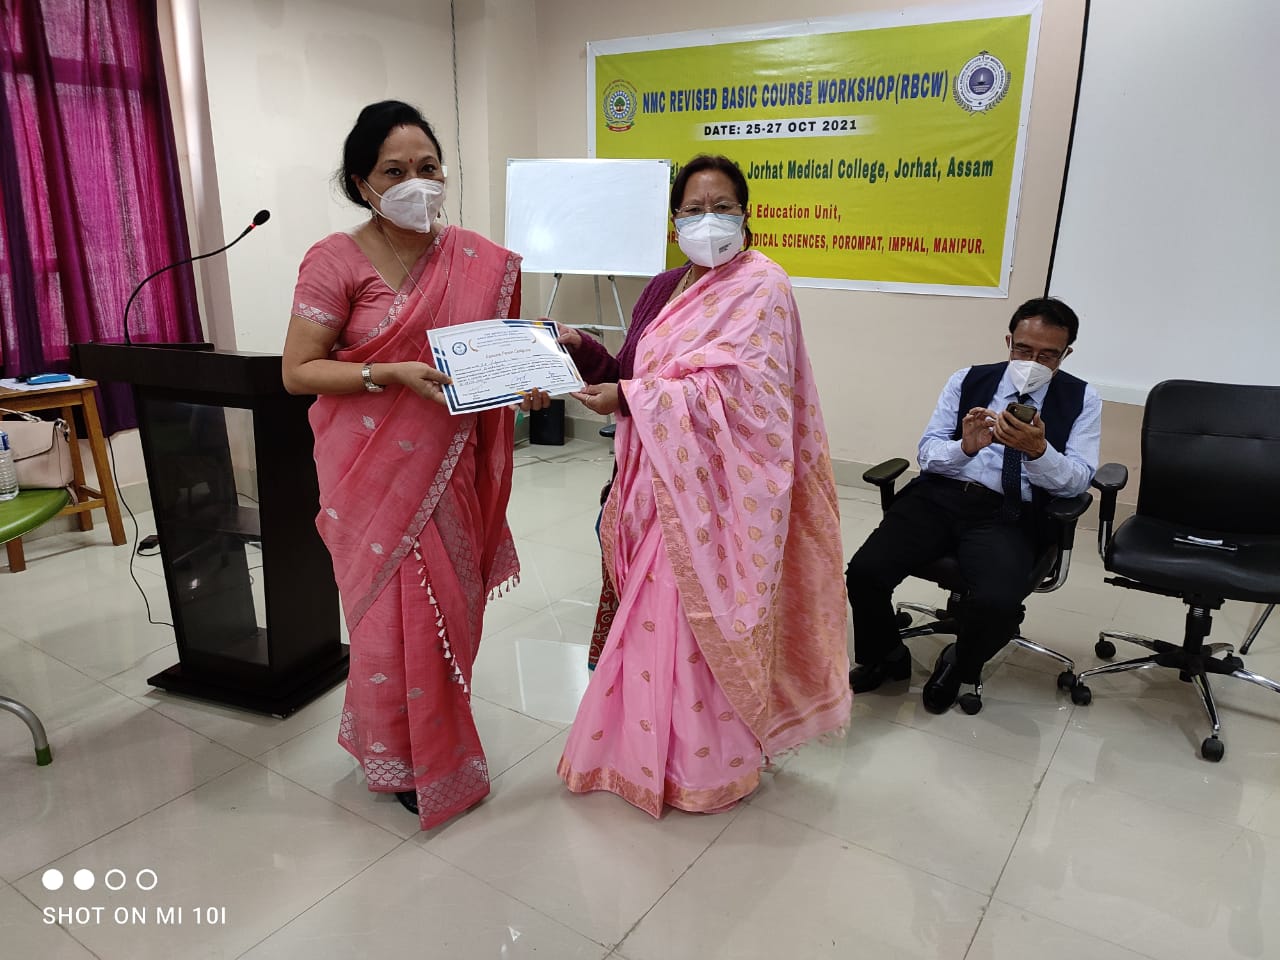 Receiving Certificate from the NMC observer for Resource Person Revised Basic Course On 281021